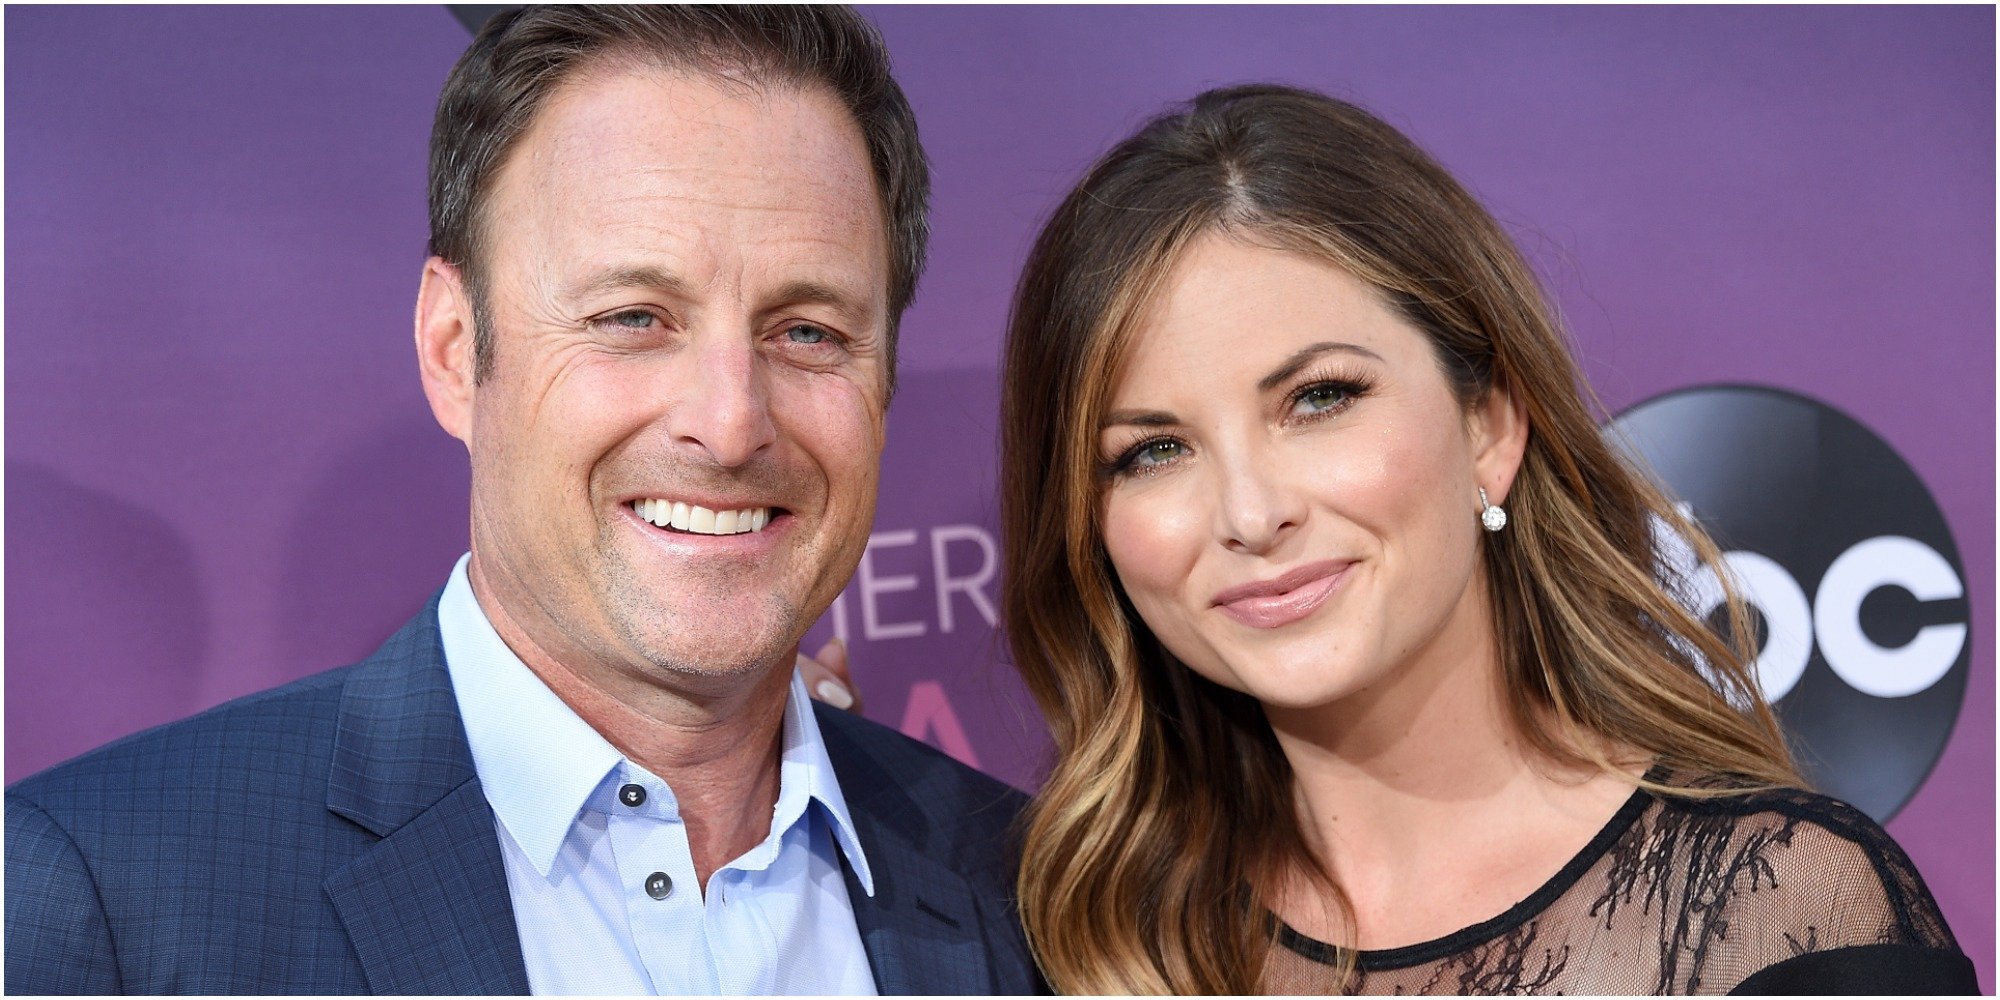 Chris Harrison and Lauren Zima pose at a red carpet event.